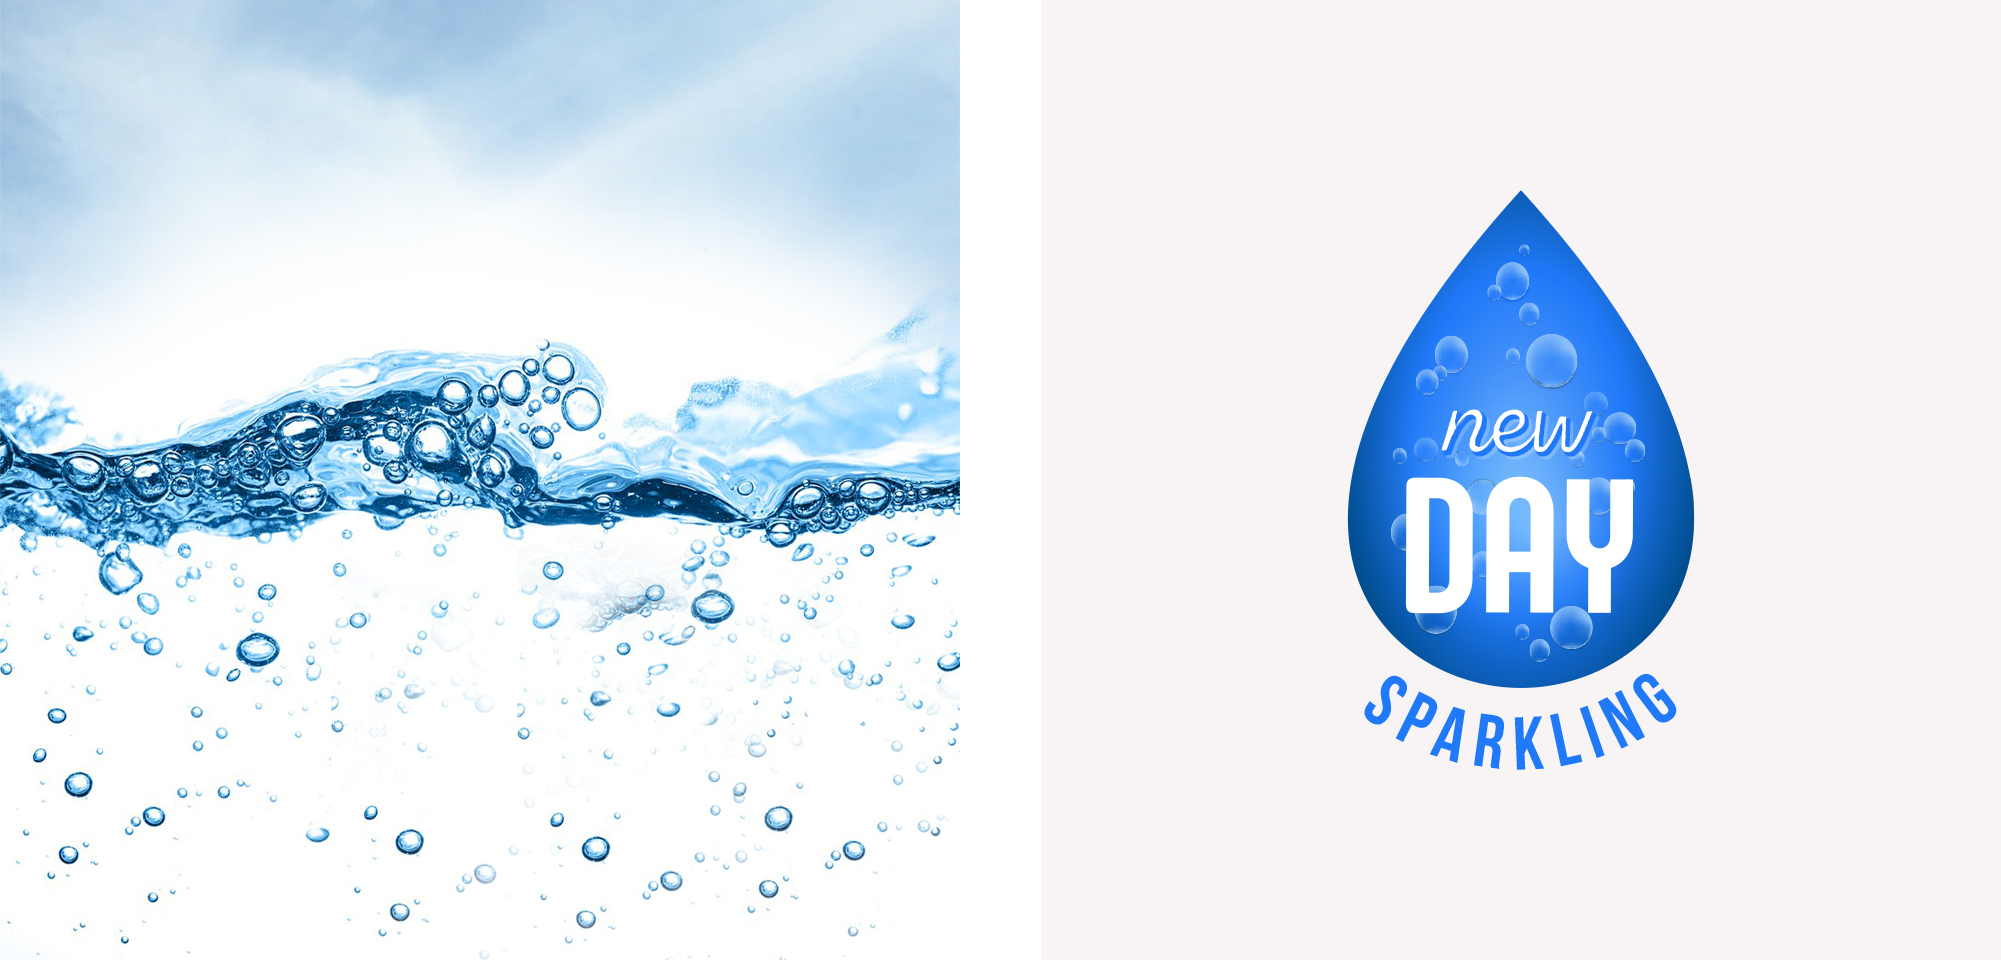 Sparkling water logo and imaginery